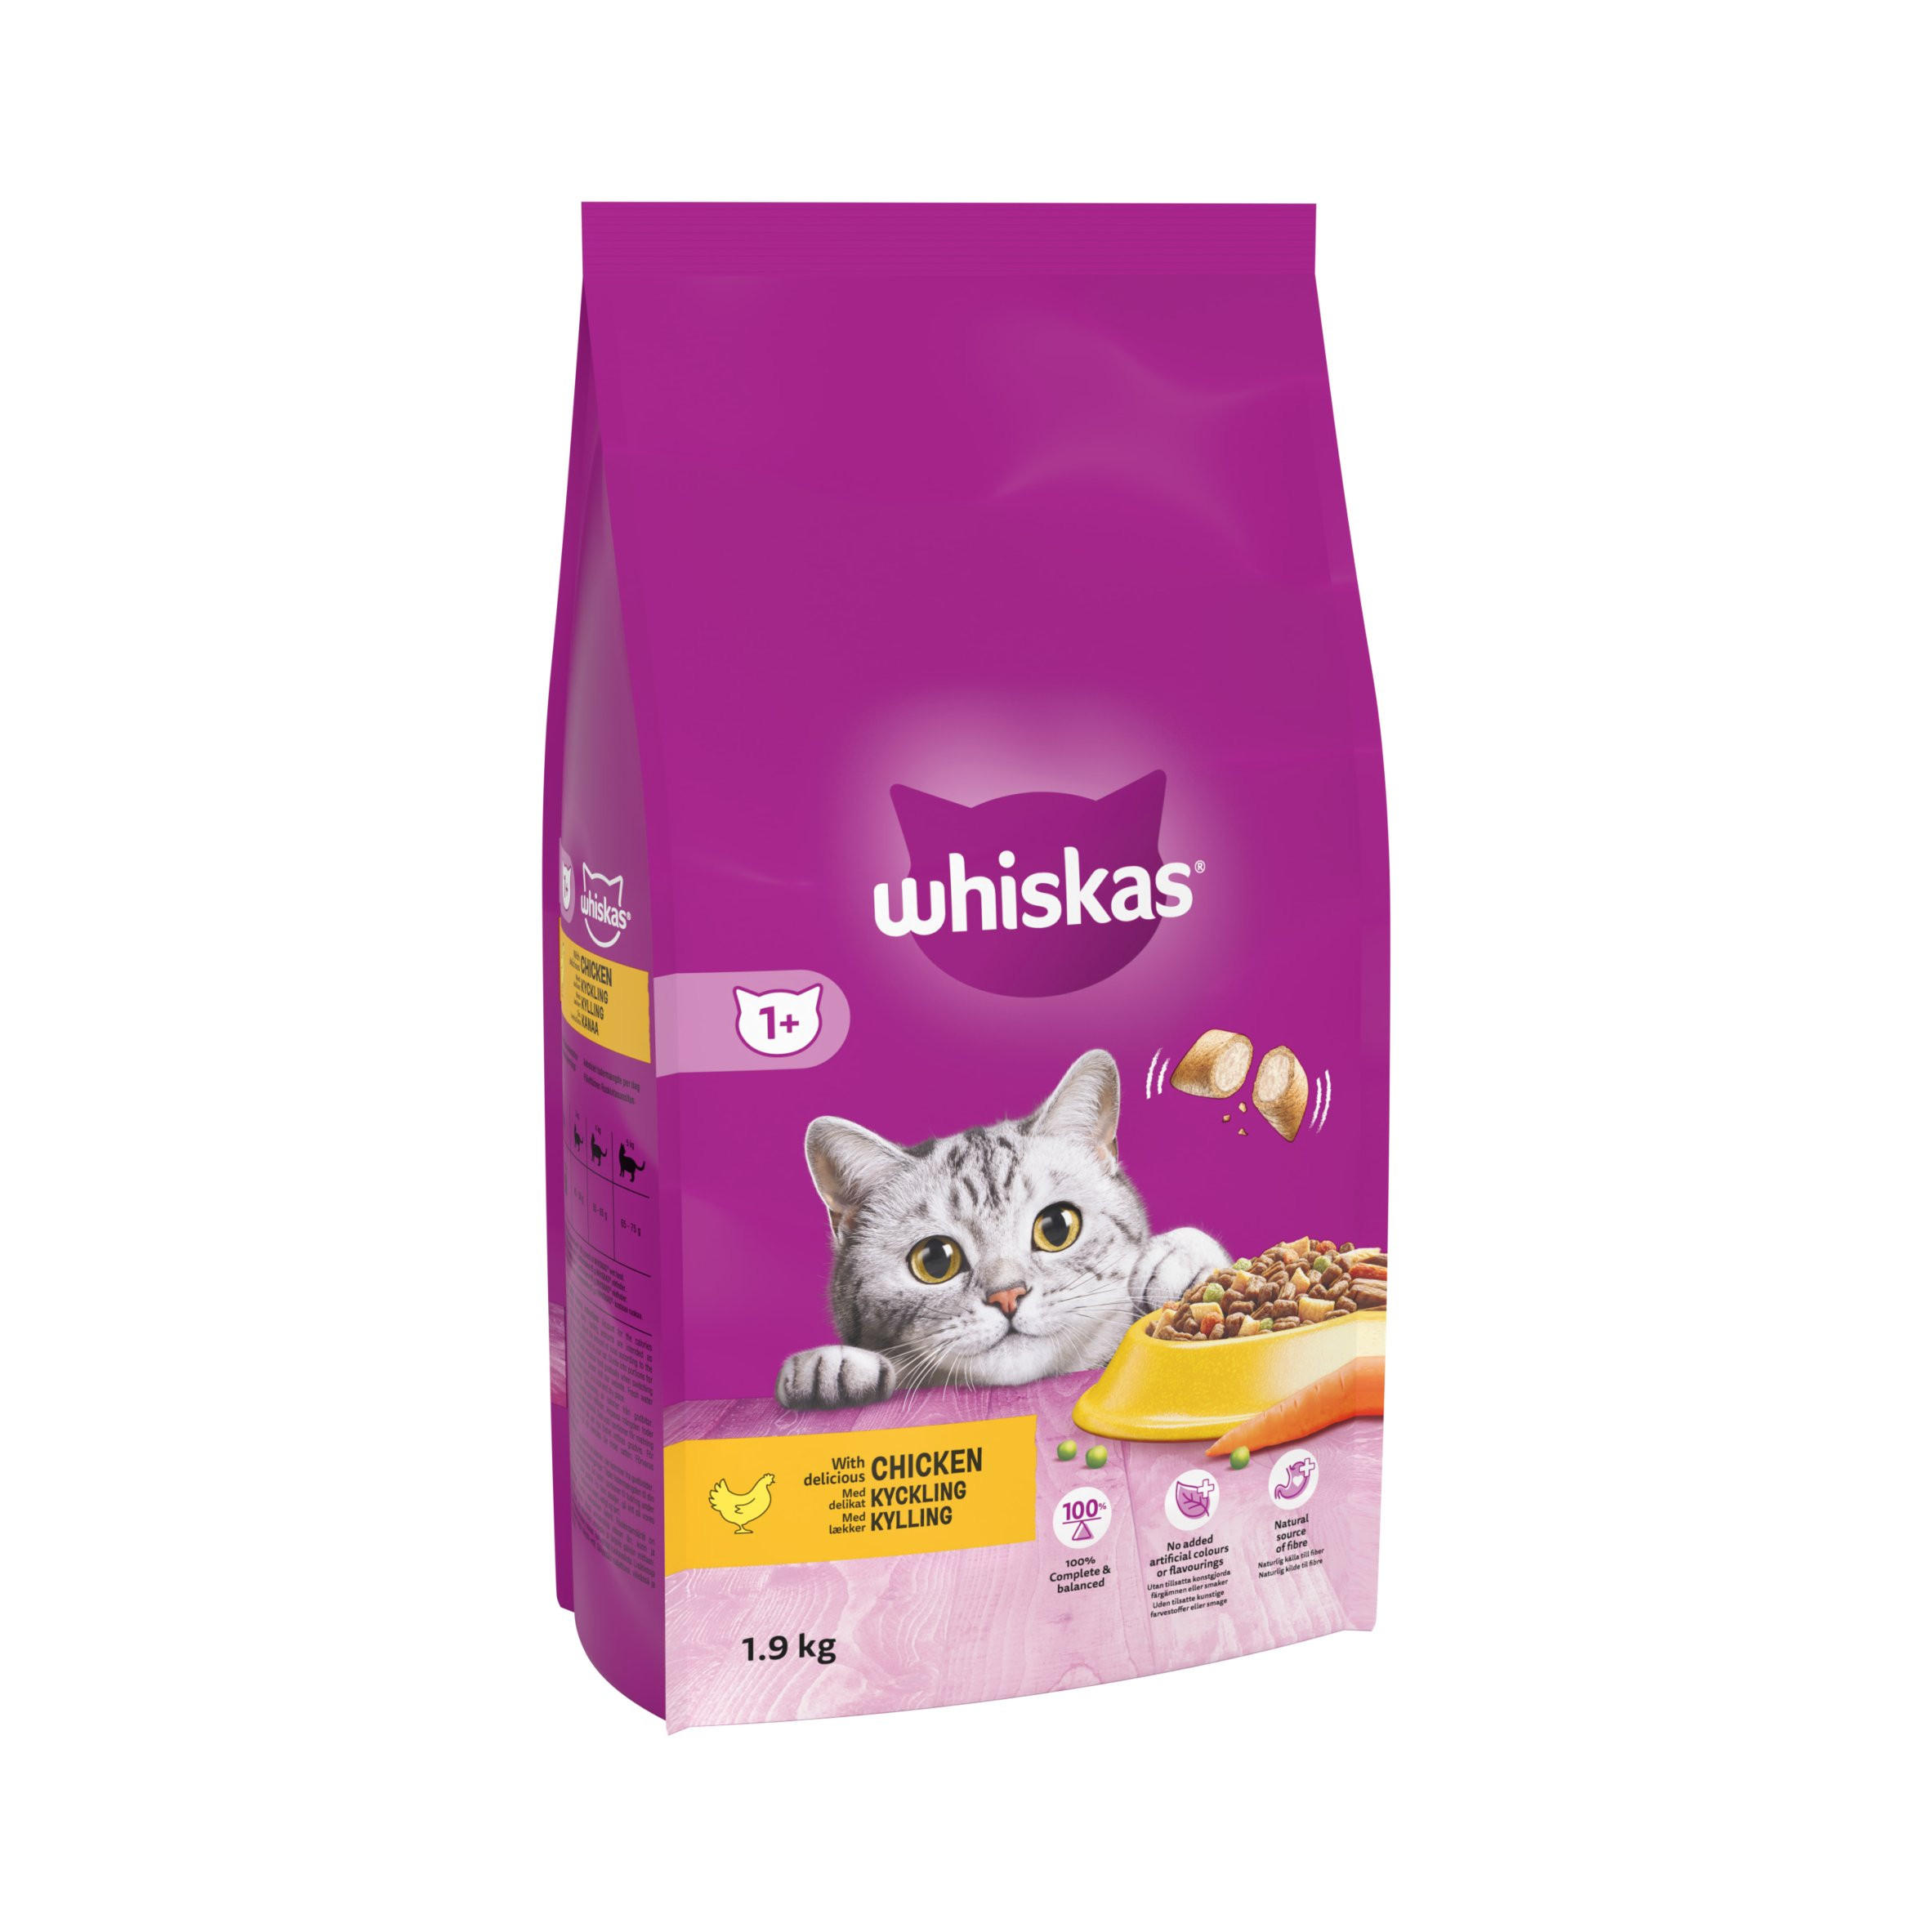 Whiskas 1+ Chicken Adult Dry Cat Food 1.9kg | Cat Food | Iceland Foods